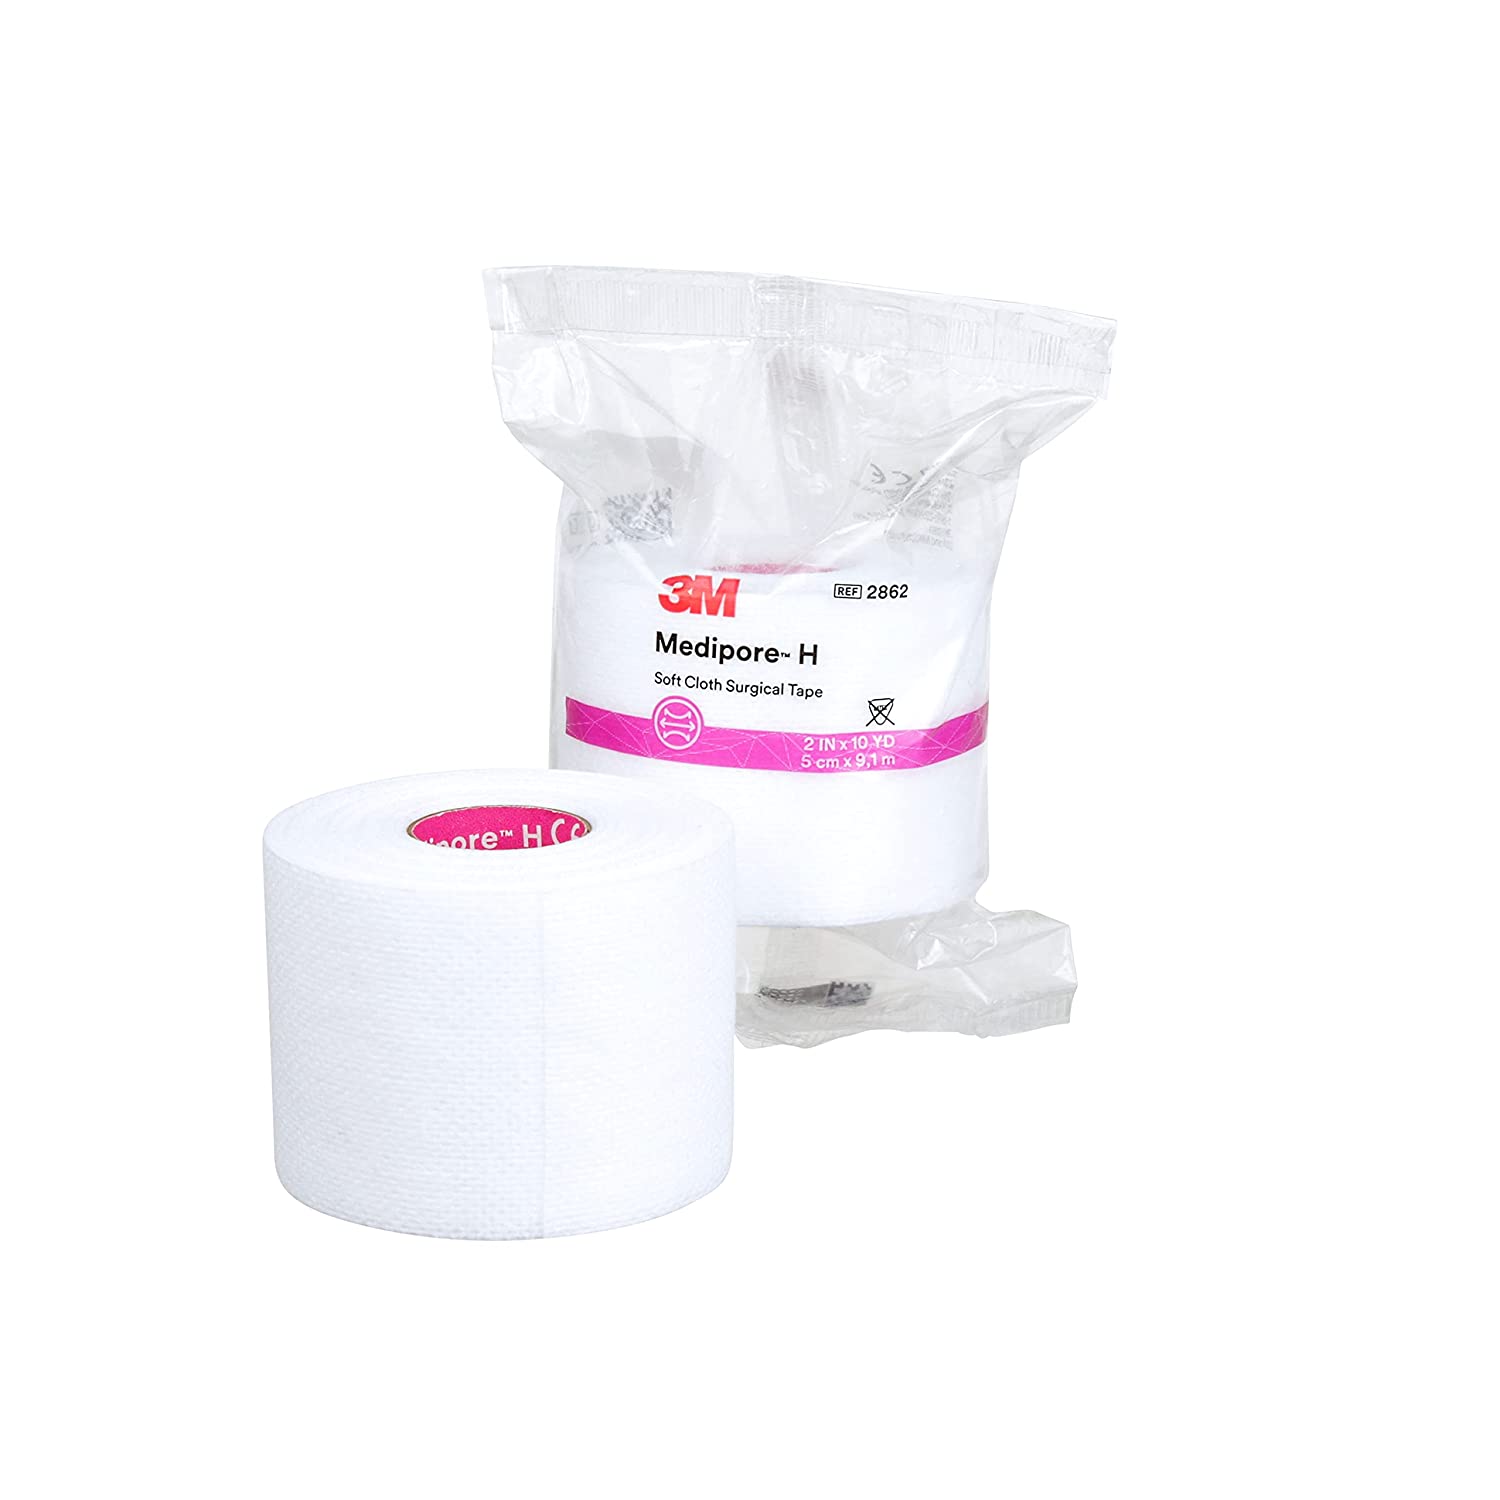 flexible-and-latex-free-surgical-tape-medipore-h-soft-cloth-tape